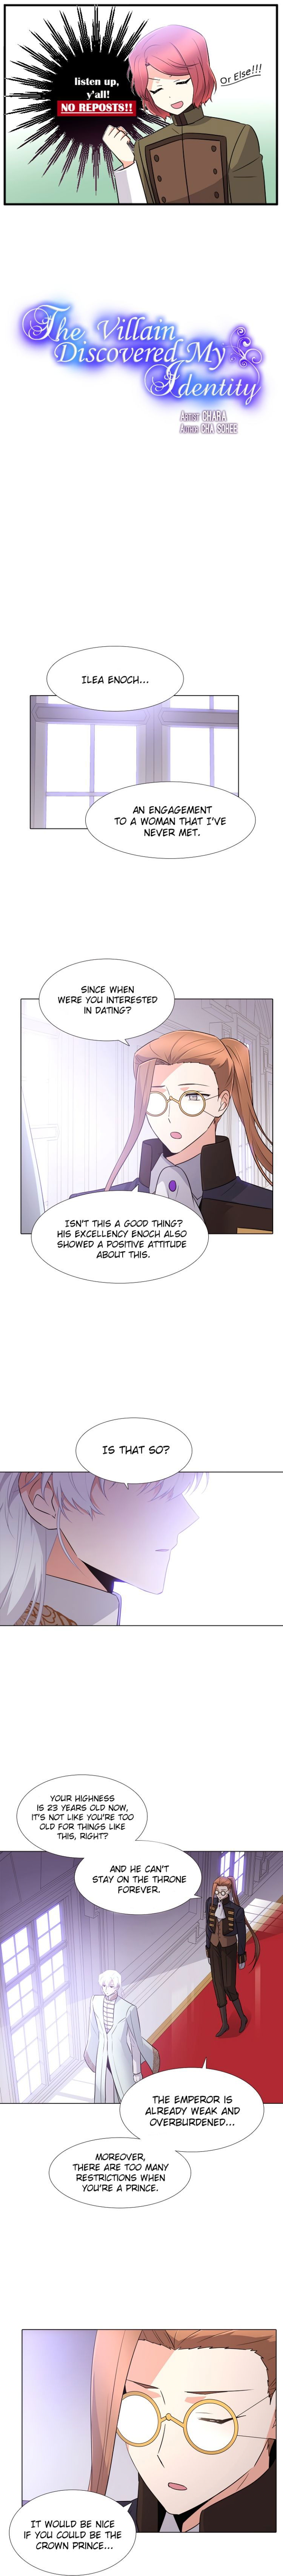 the-villain-discovered-my-identity-chap-8-0